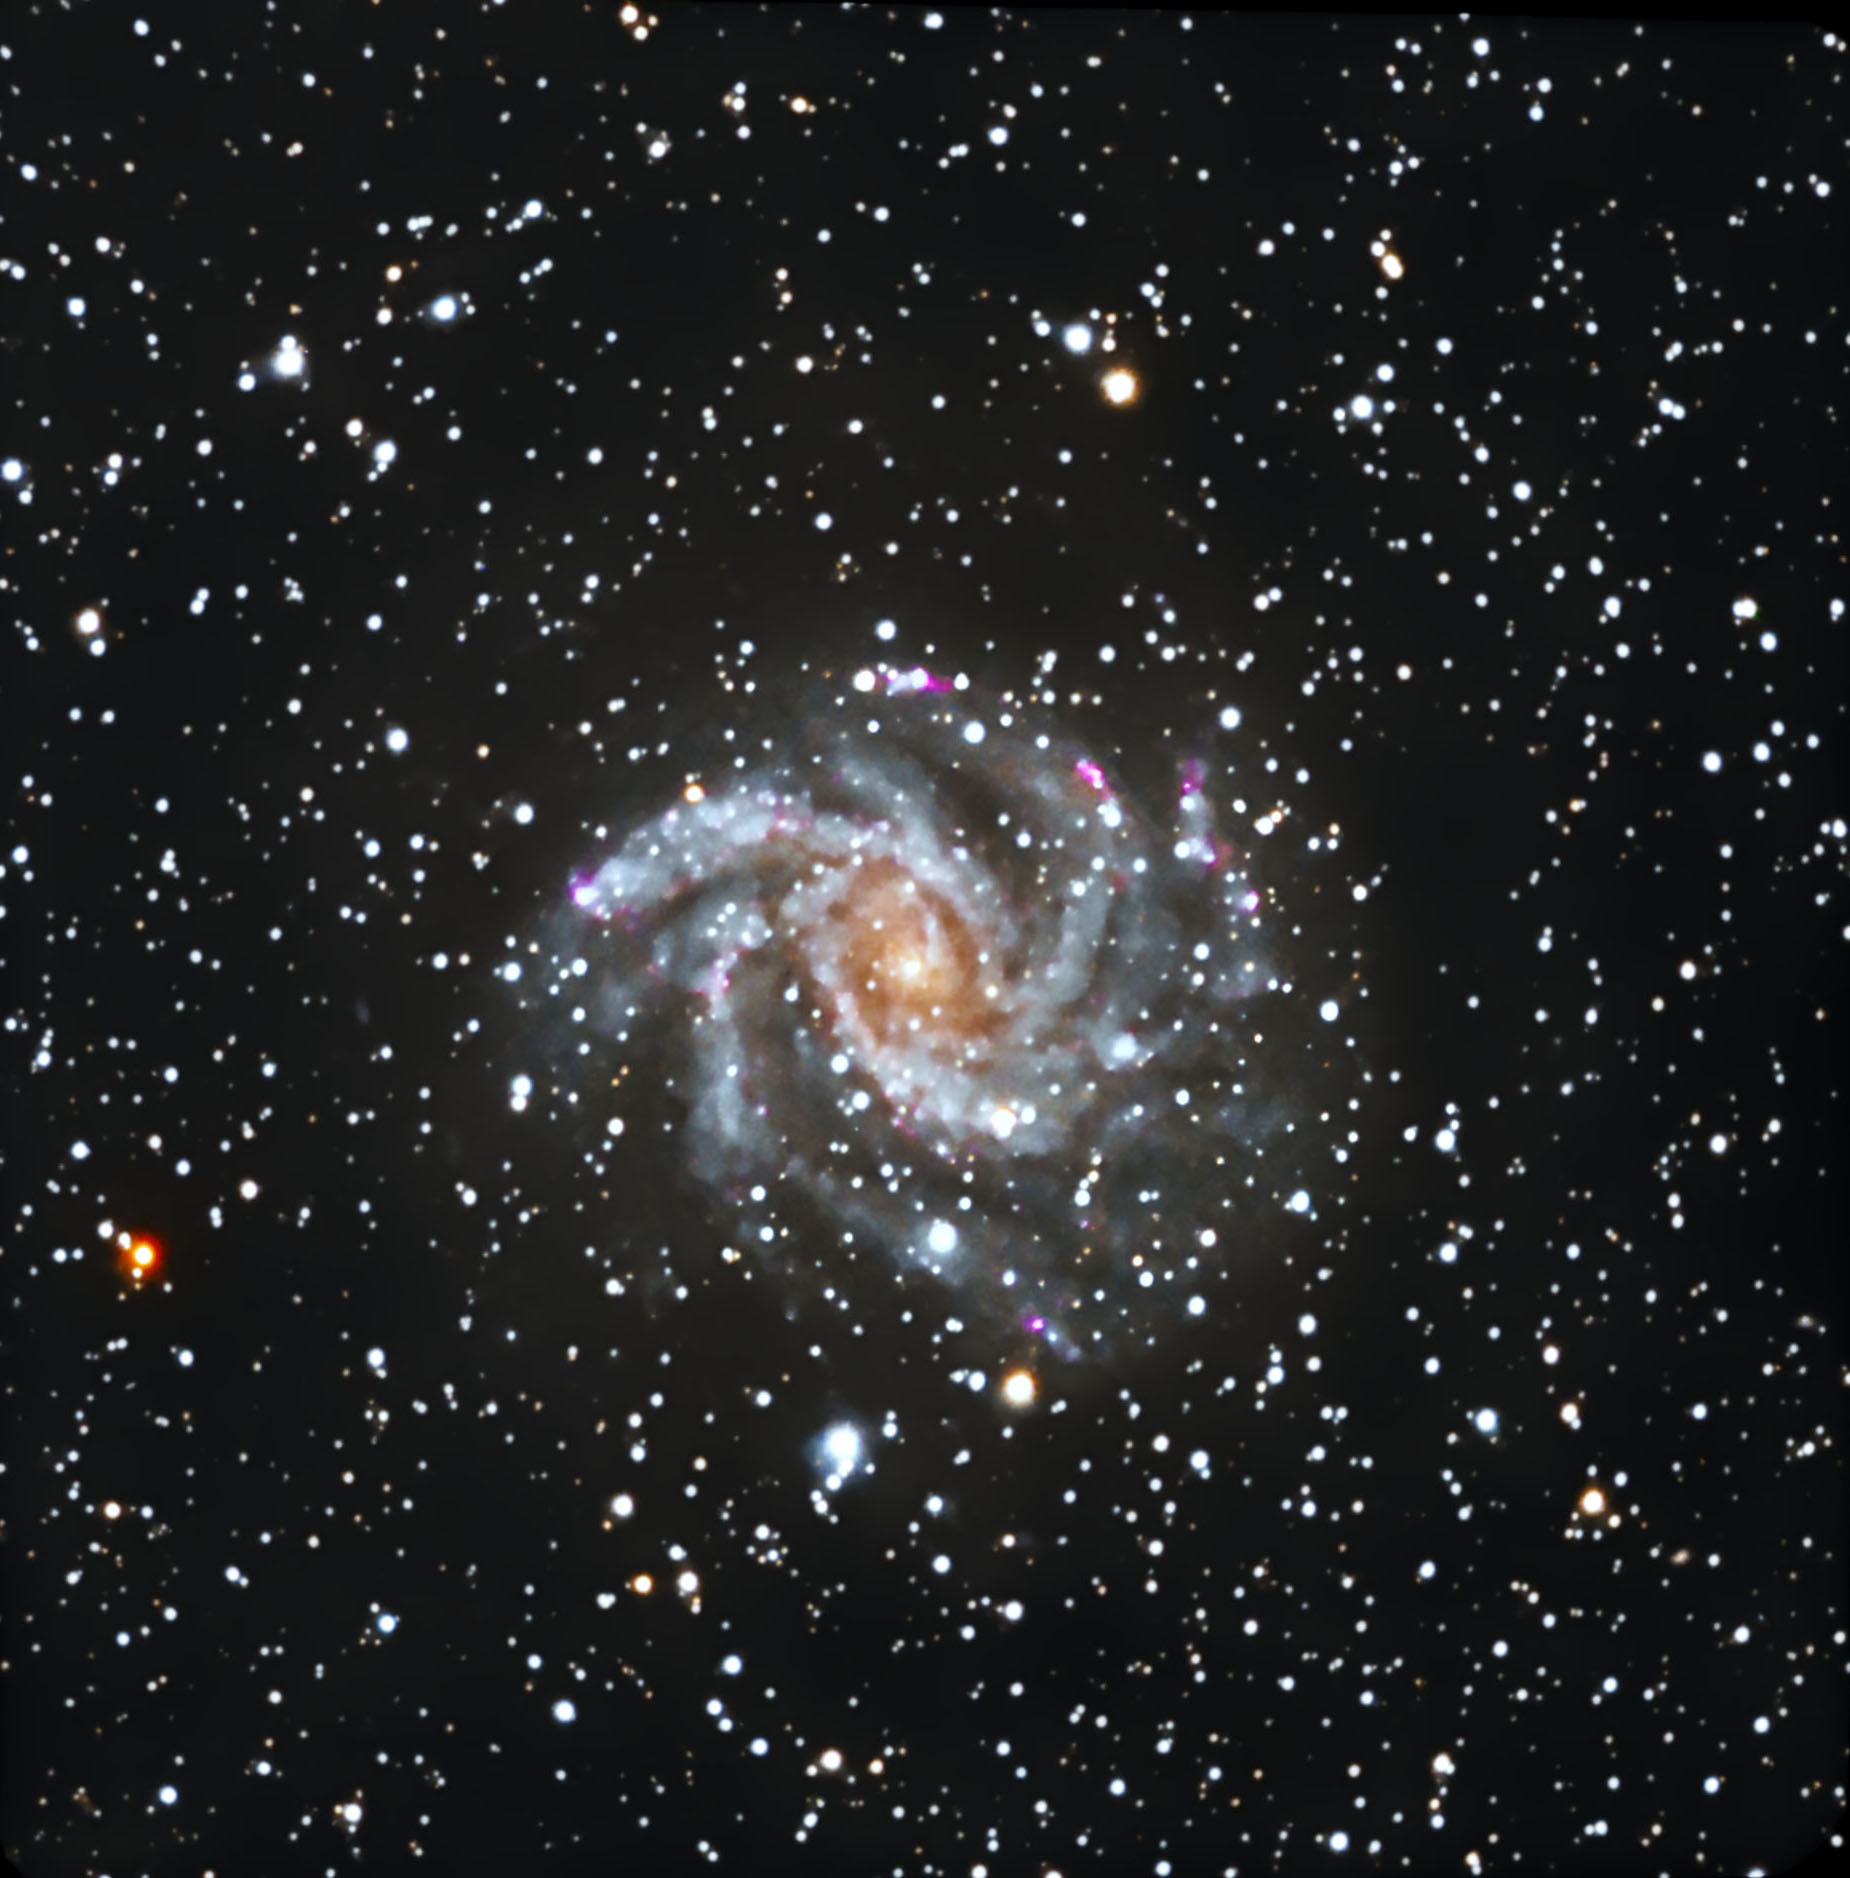 NGC 6946
        - The Fireworks Galaxy